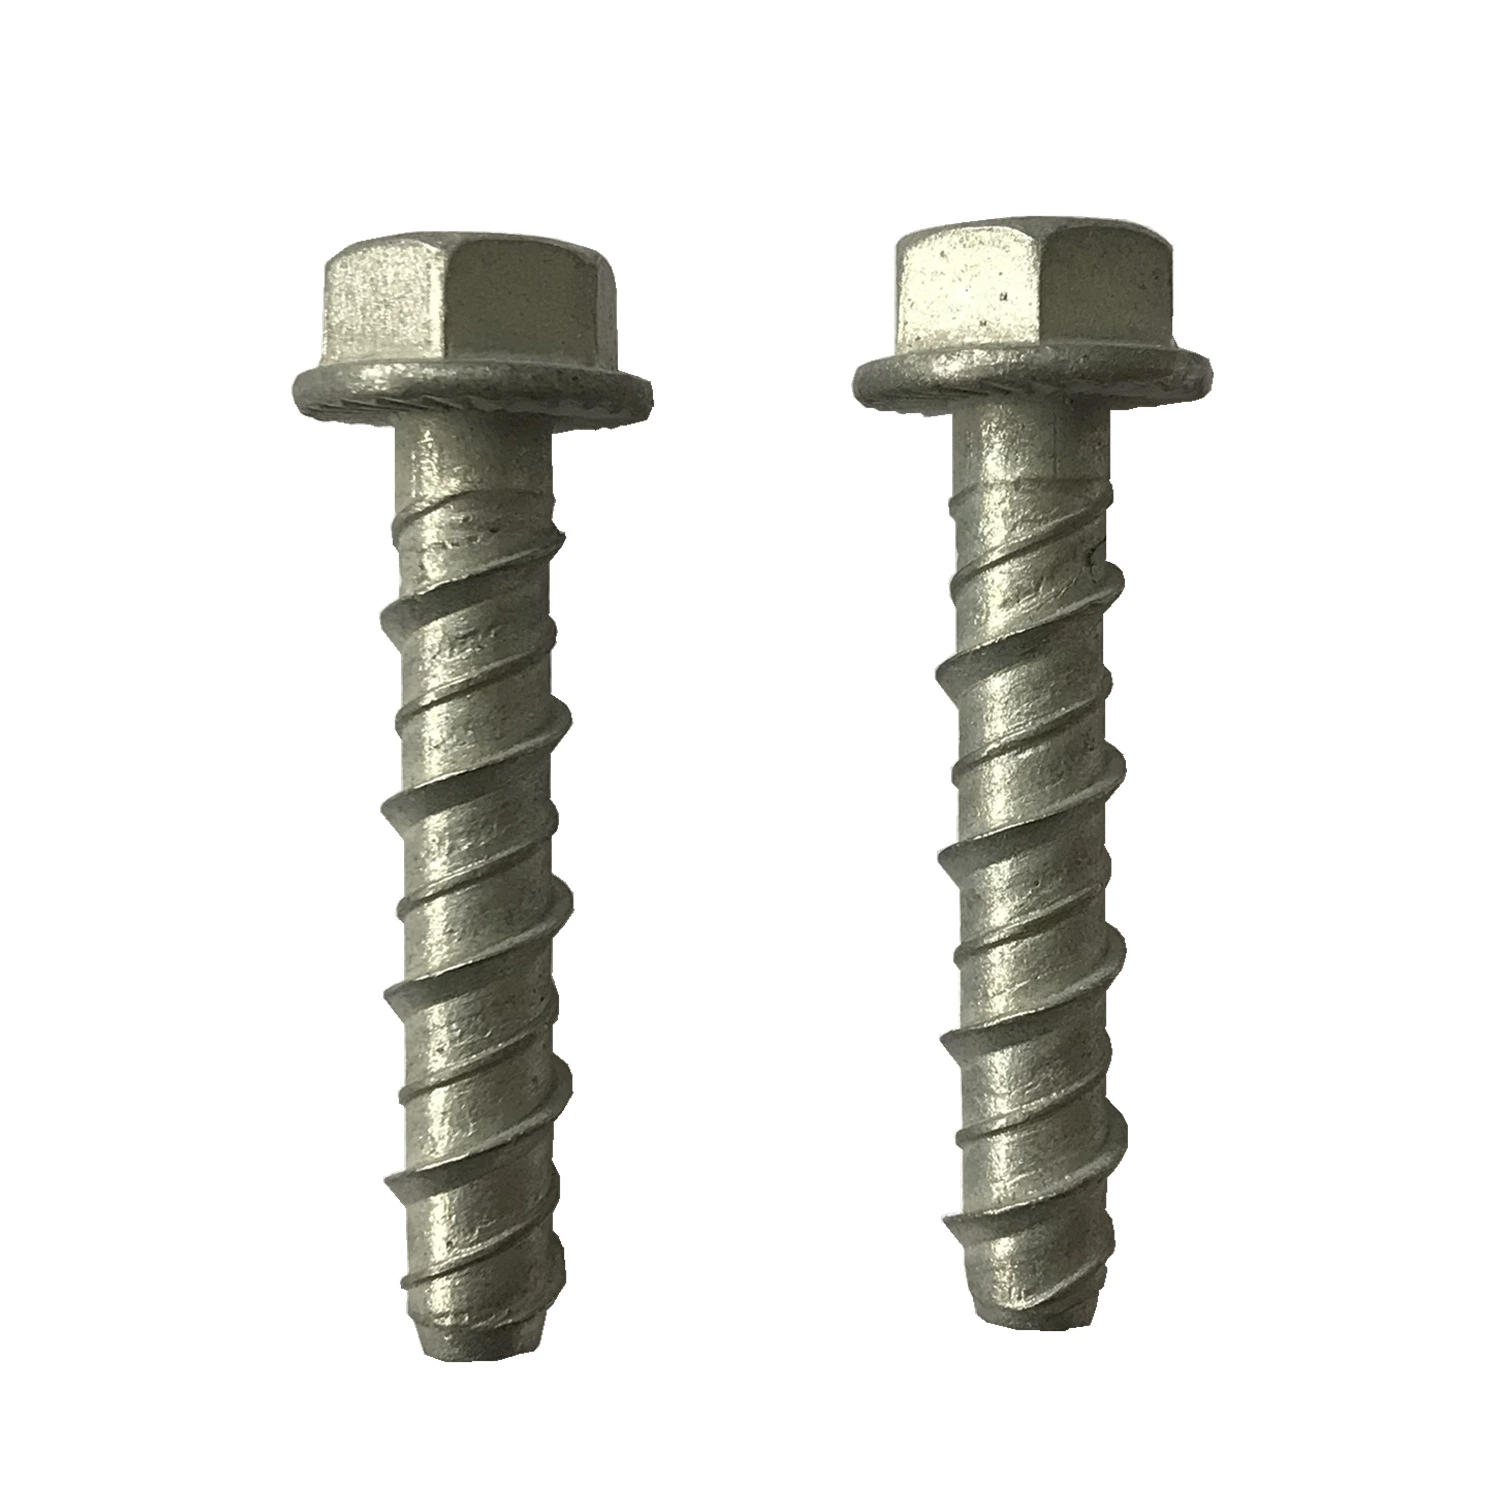 Hexagon Flange Head Concrete Anchor Bolt Technik Stainless Steel Carbon Steel Fastener Used for Curtain Wall, Windows, Cable Tray, Wooden Structure Zinc Plated